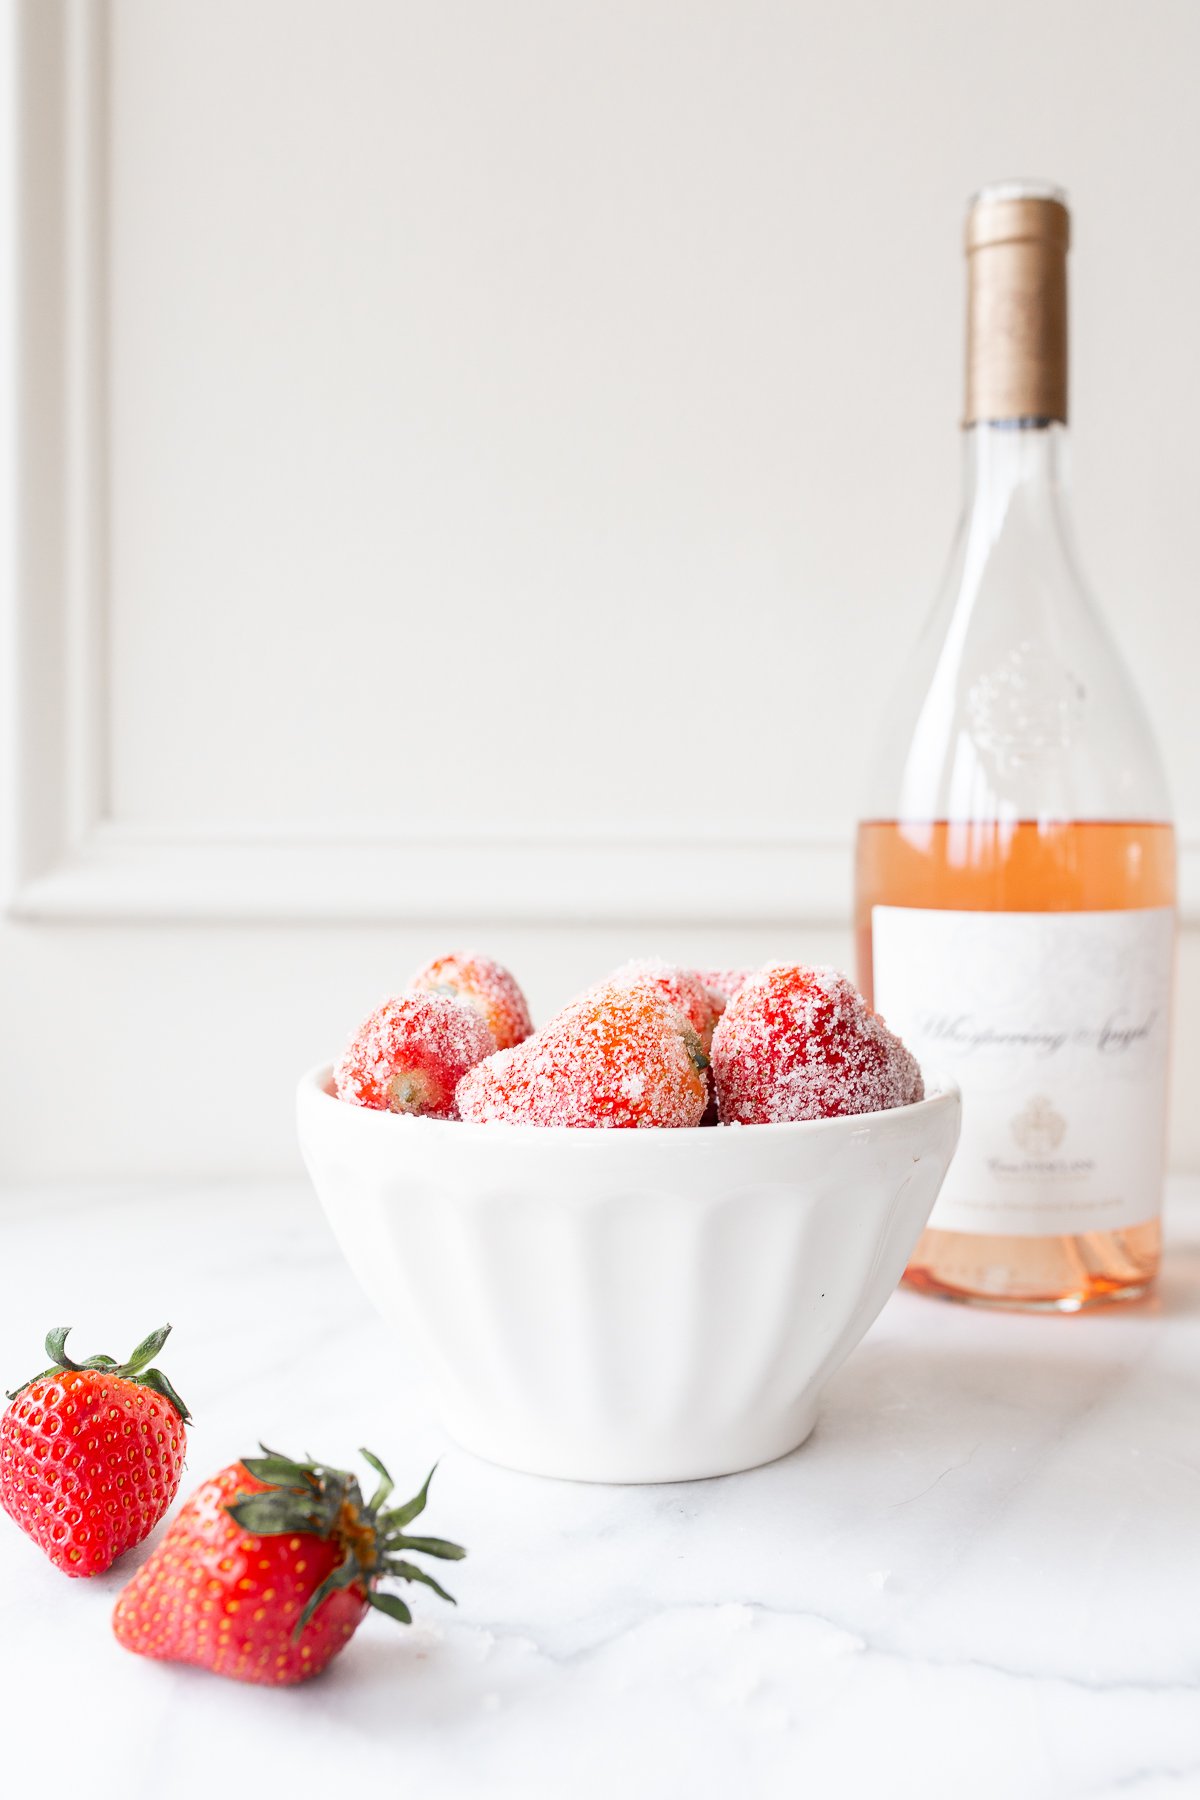 A bottle of wine behind a bowl of strawberries, to make drunken strawberries as a 4th of July recipe.